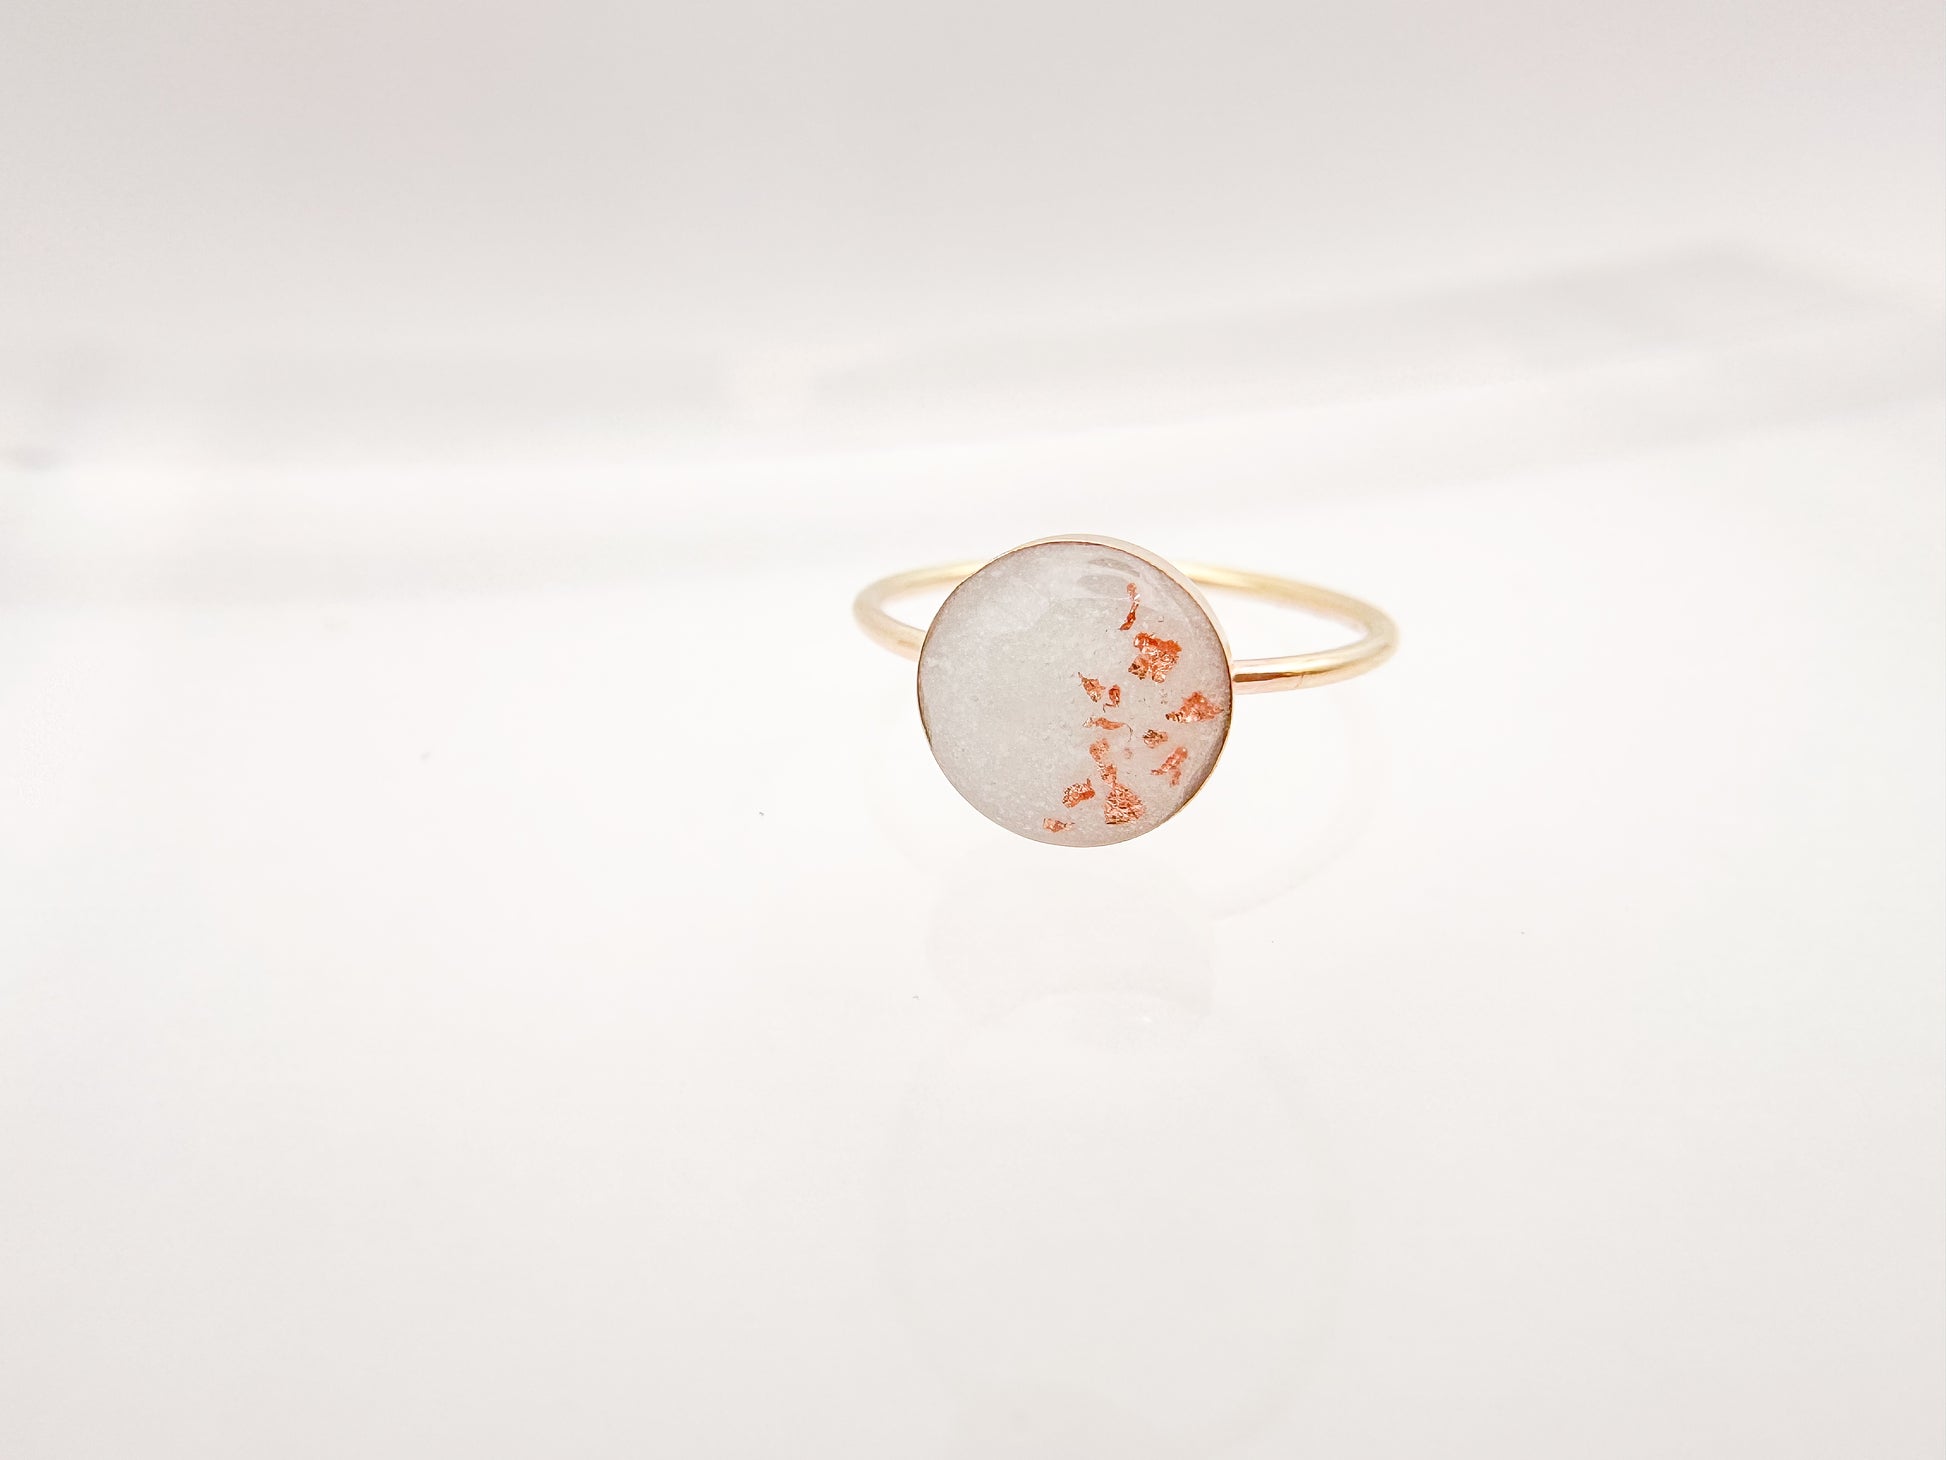 Gold ring with Breastmilk and copper flakes.